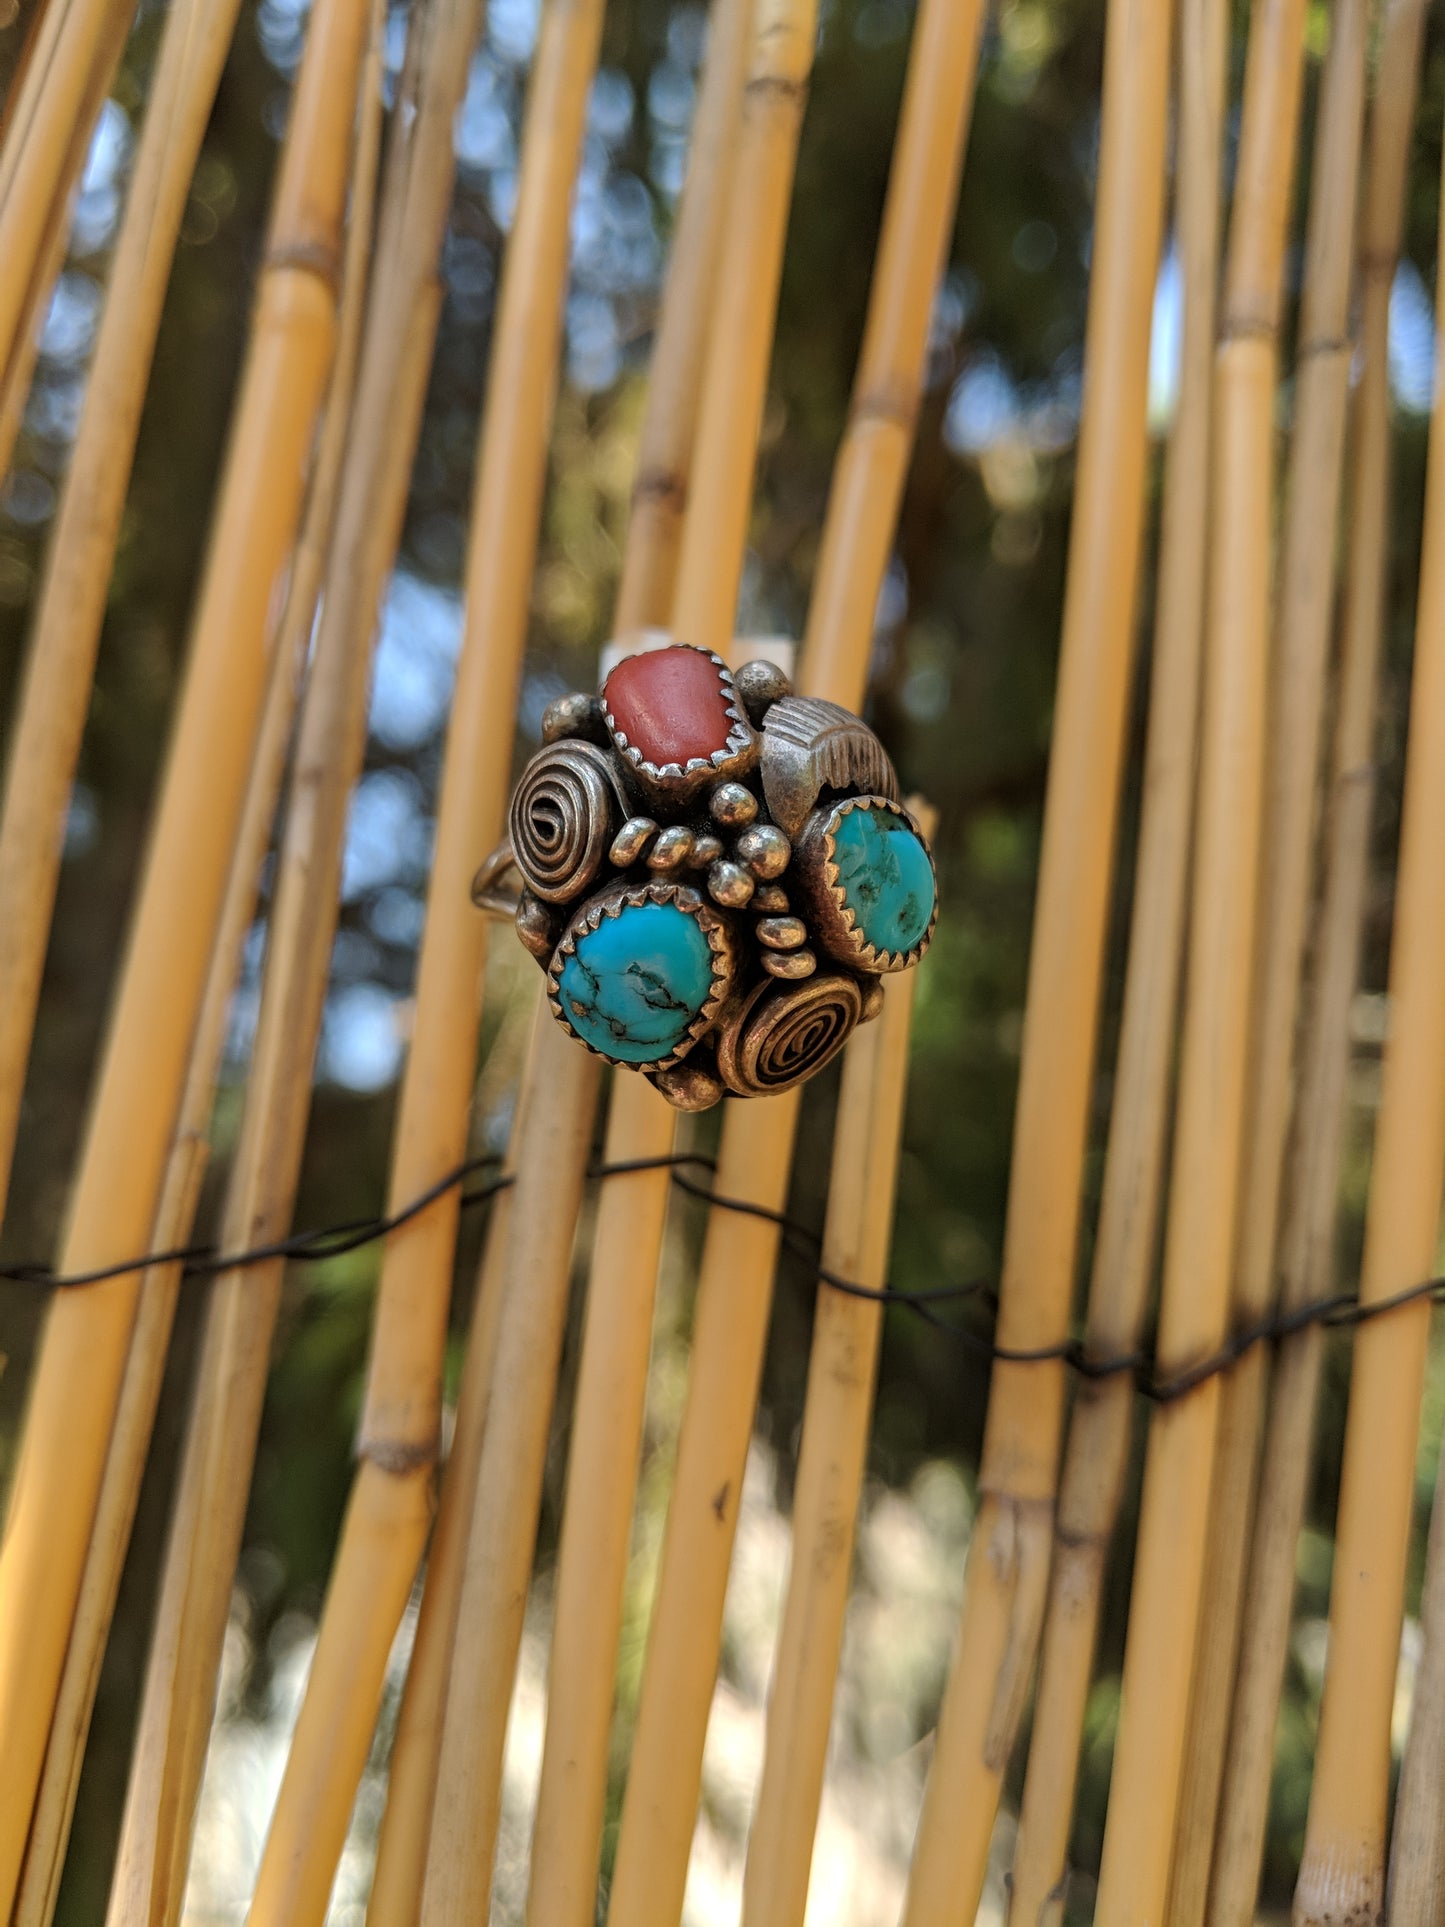 Southwest Turquoise & Coral Ring Size 8.25 - Dirty 30 Vintage | Vintage Clothing, Vintage Jewelry, Vintage Accessories